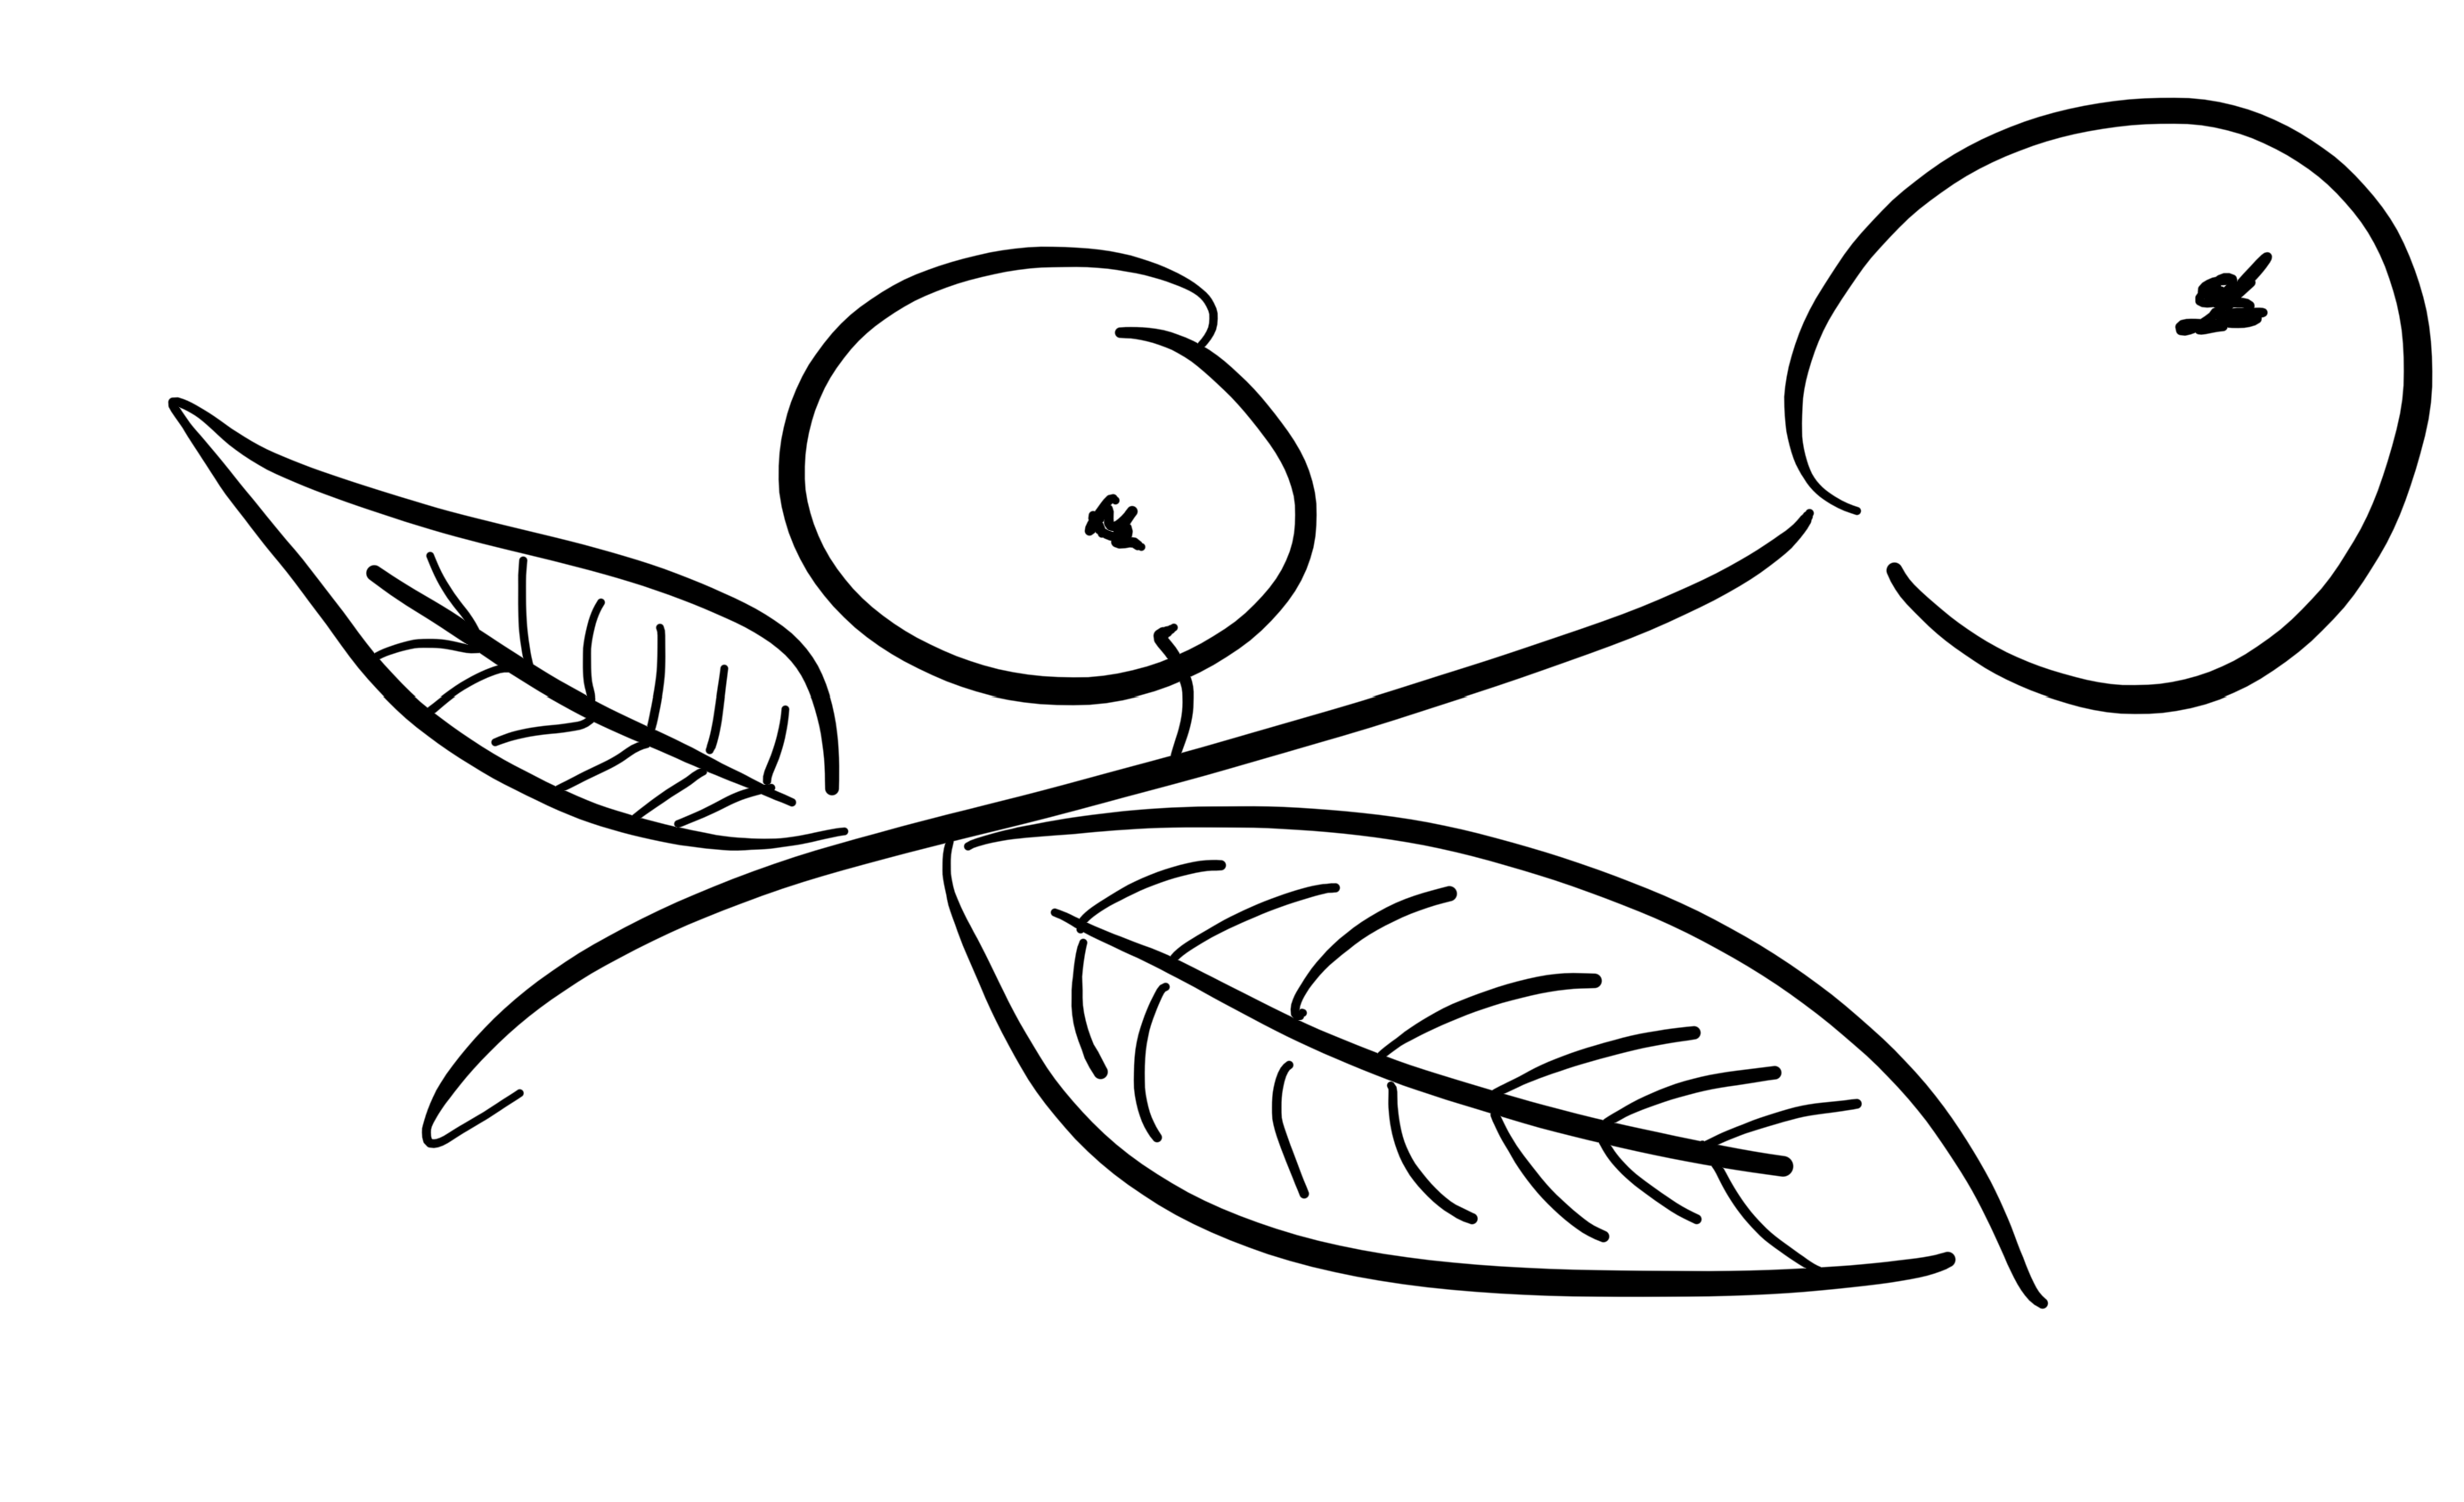 black line drawing of two oranges with two leaves